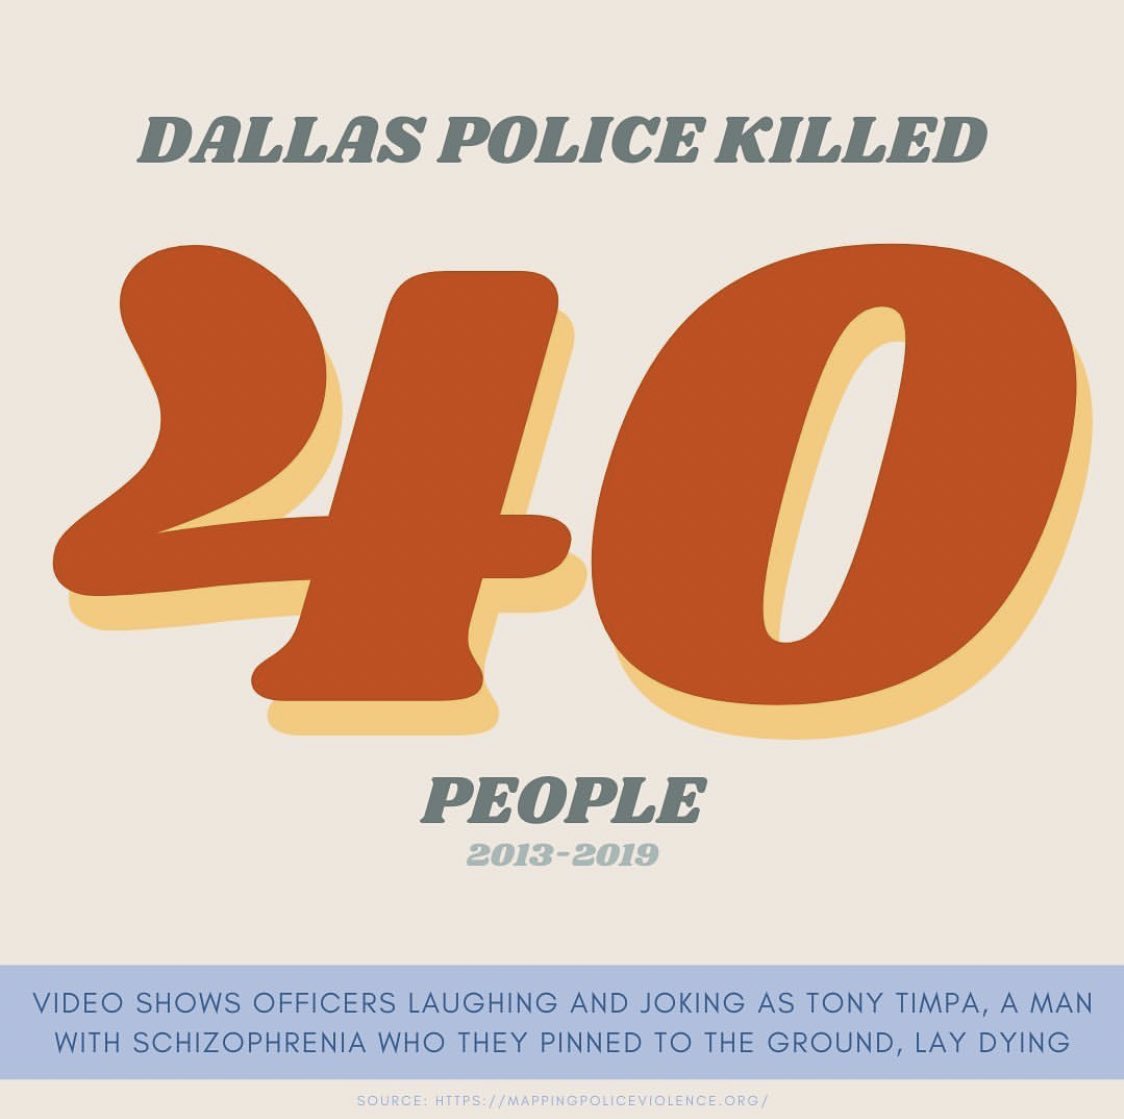 also here's how many people Dallas PD and Houston PD killed between 2013-2019. However, because of records on houston pd's website, we know that between 2005-2019 HPD killed 138 people.